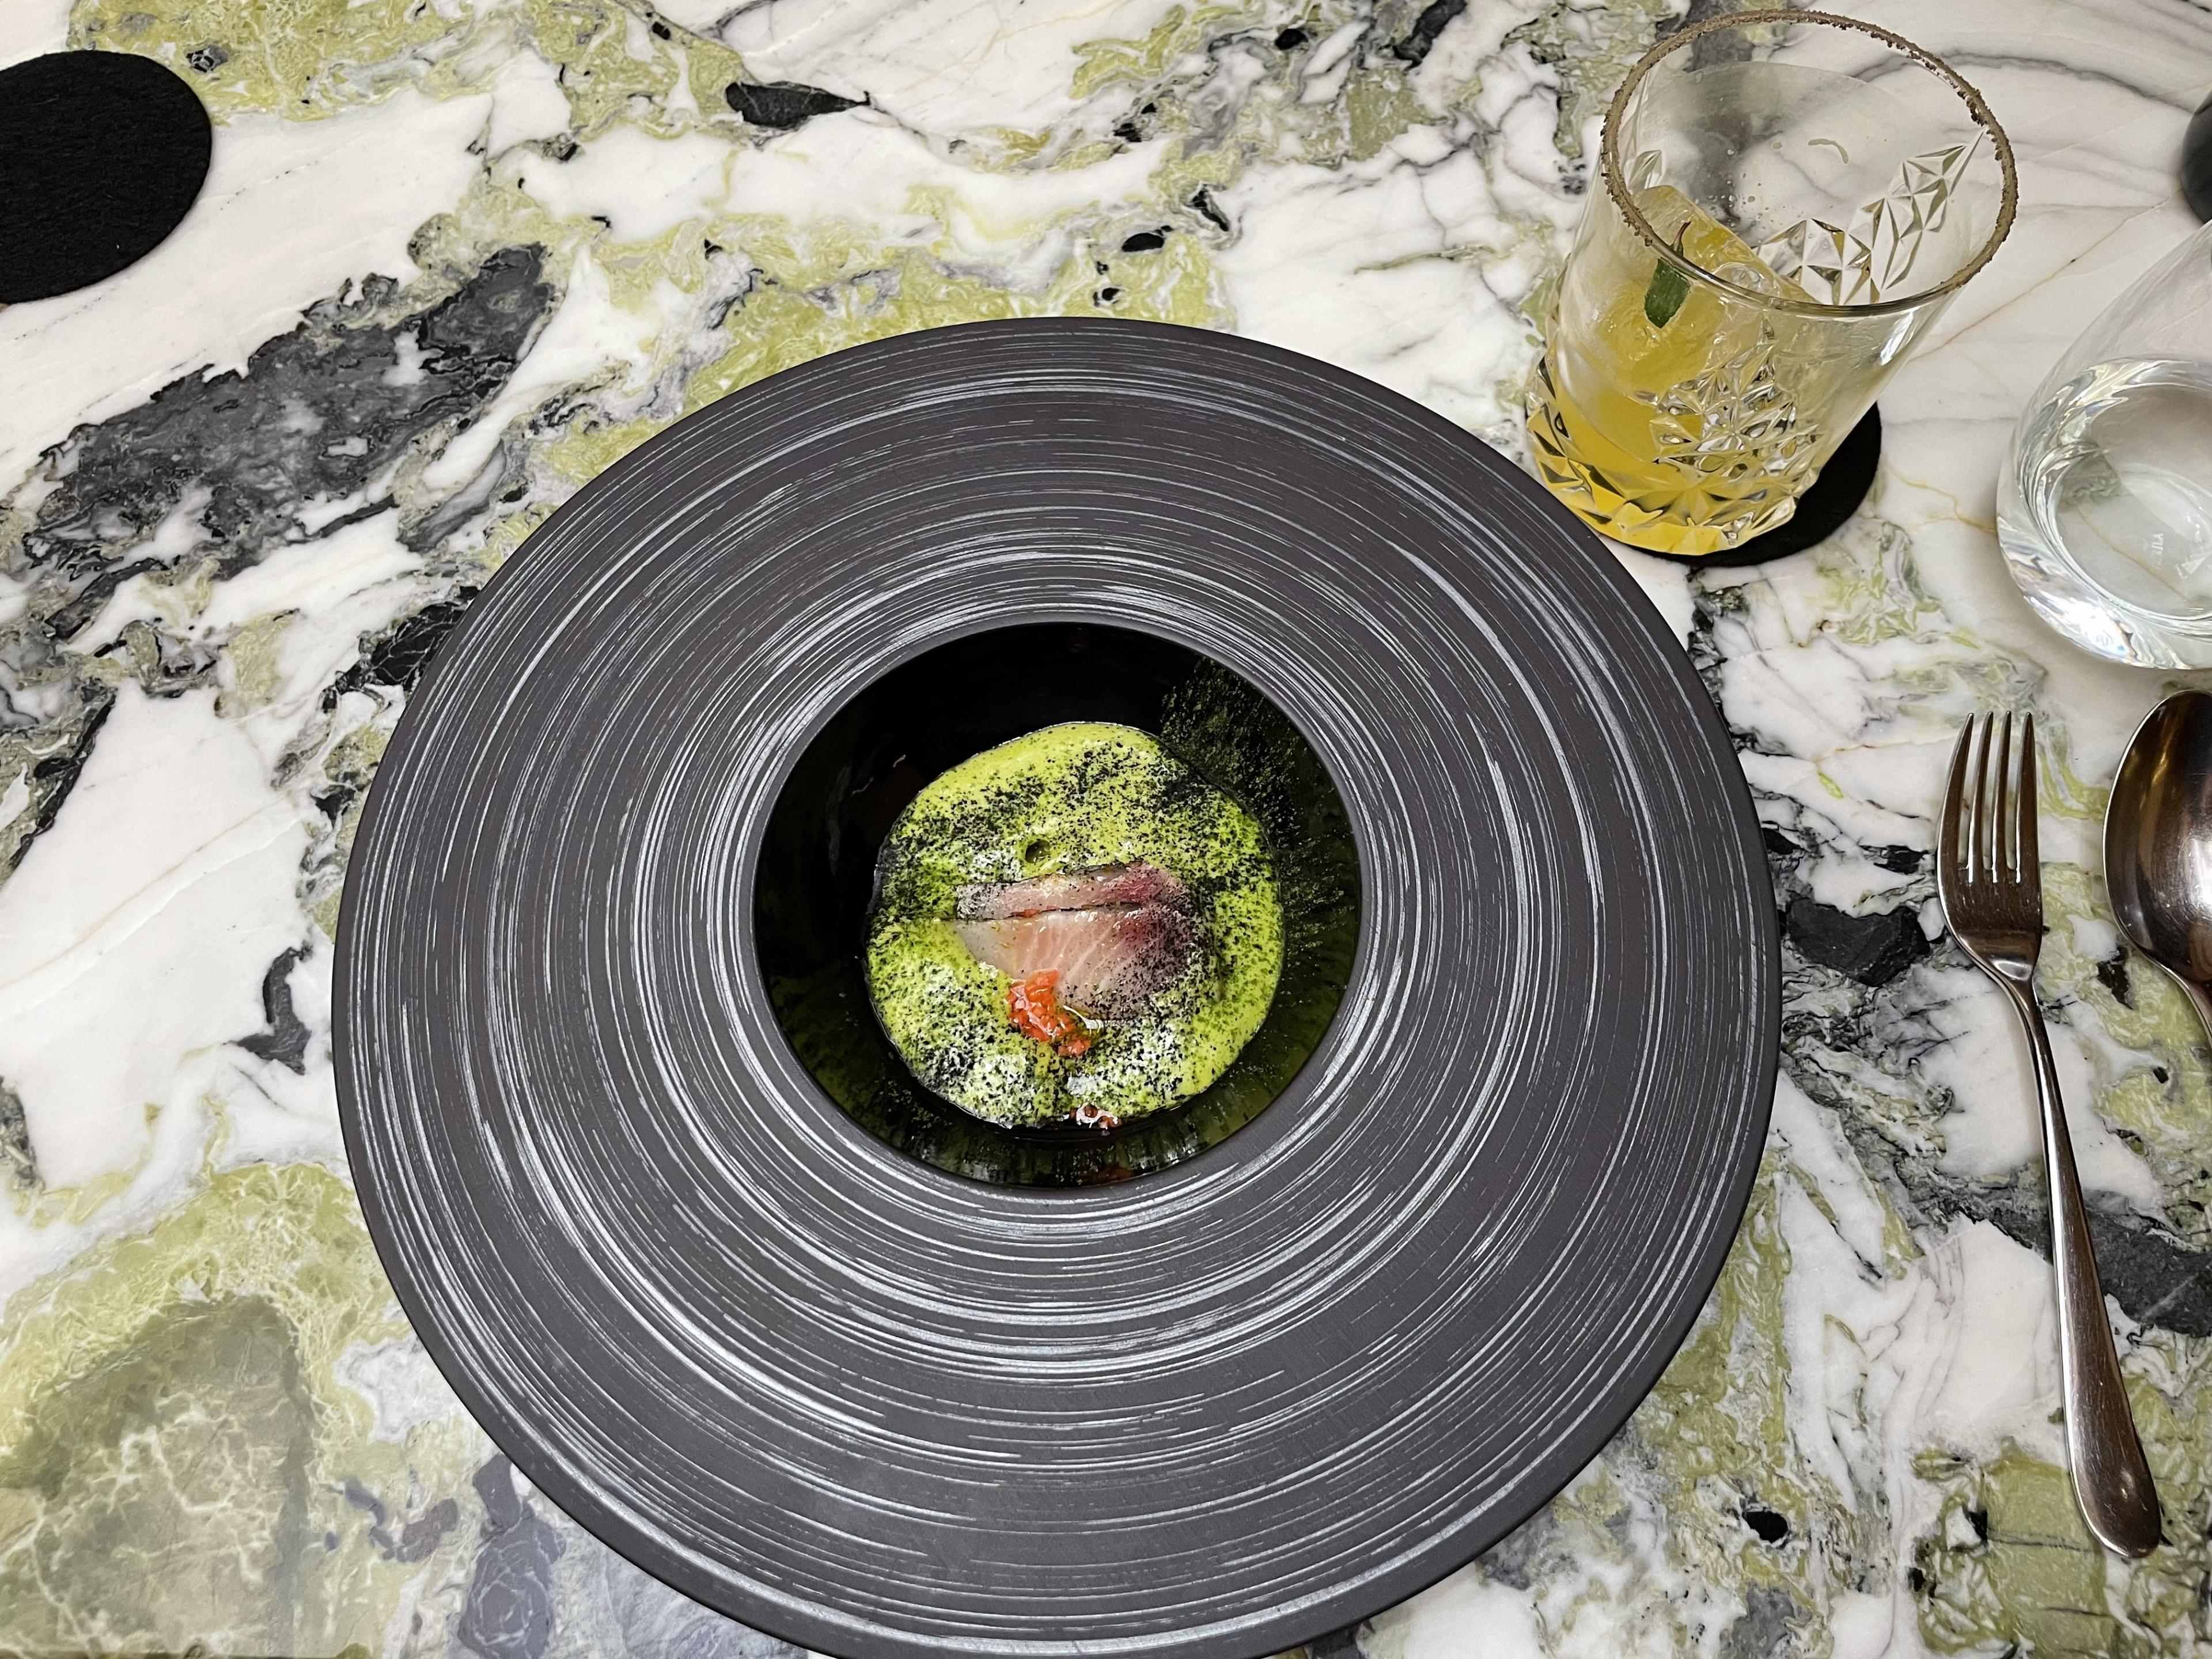 overview of circular gray plate on a stone table. inside plate is fish in a green sauce presented in a fine dining manner